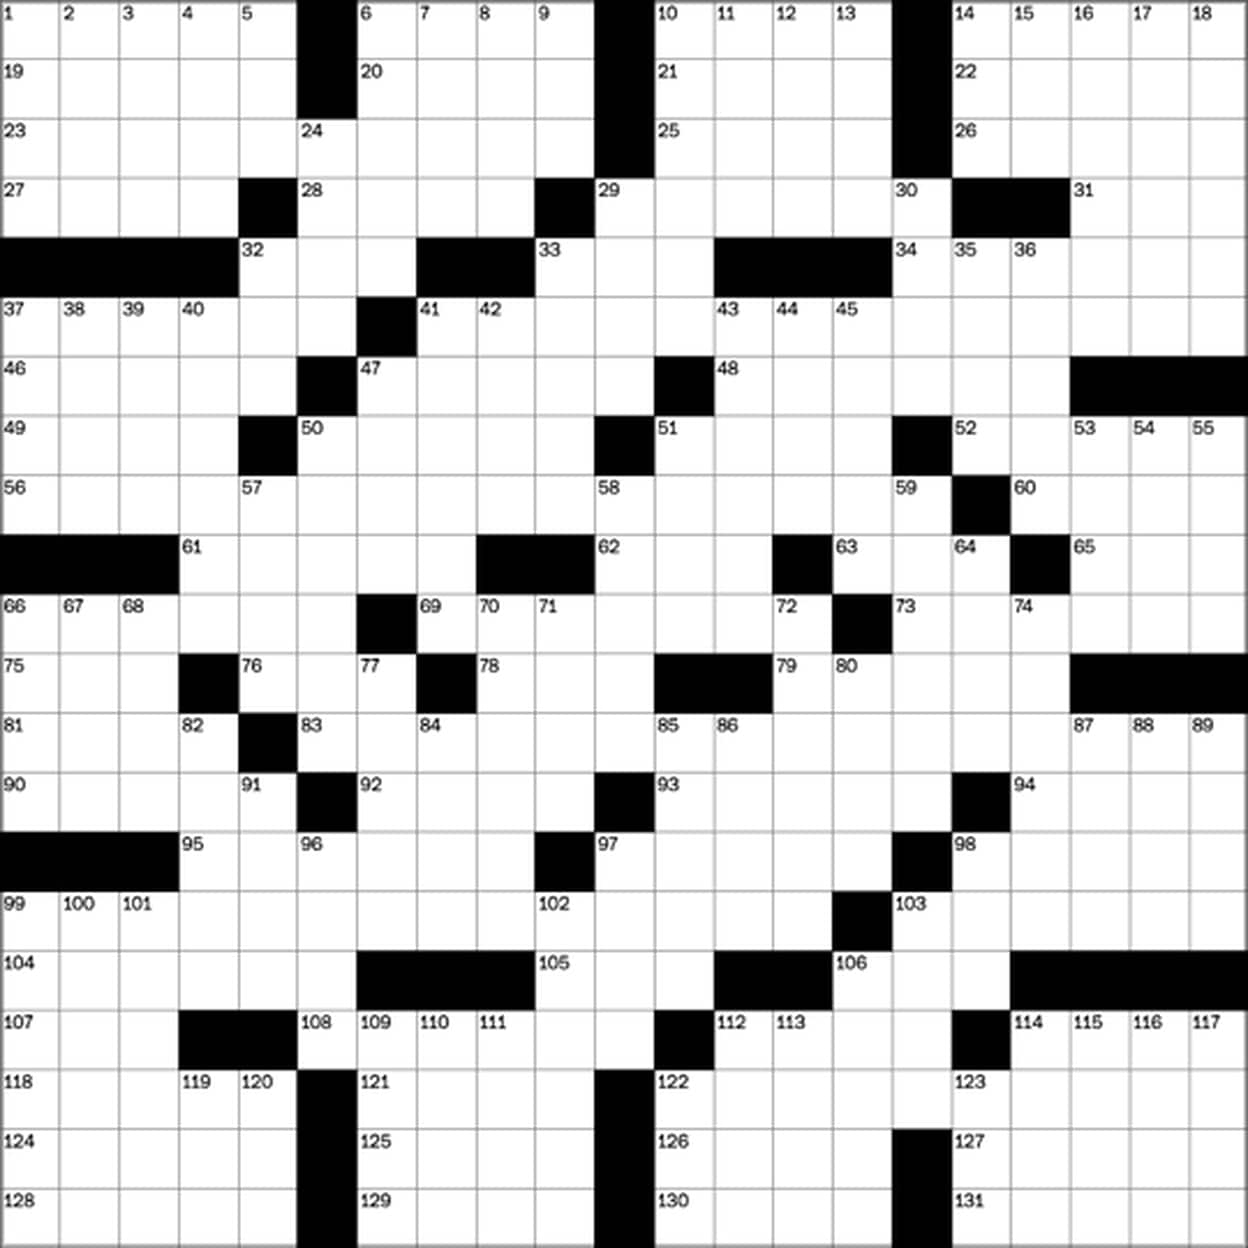 Play Free Crossword Puzzles From The Washington Post - The - Printable Crossword Washington Post